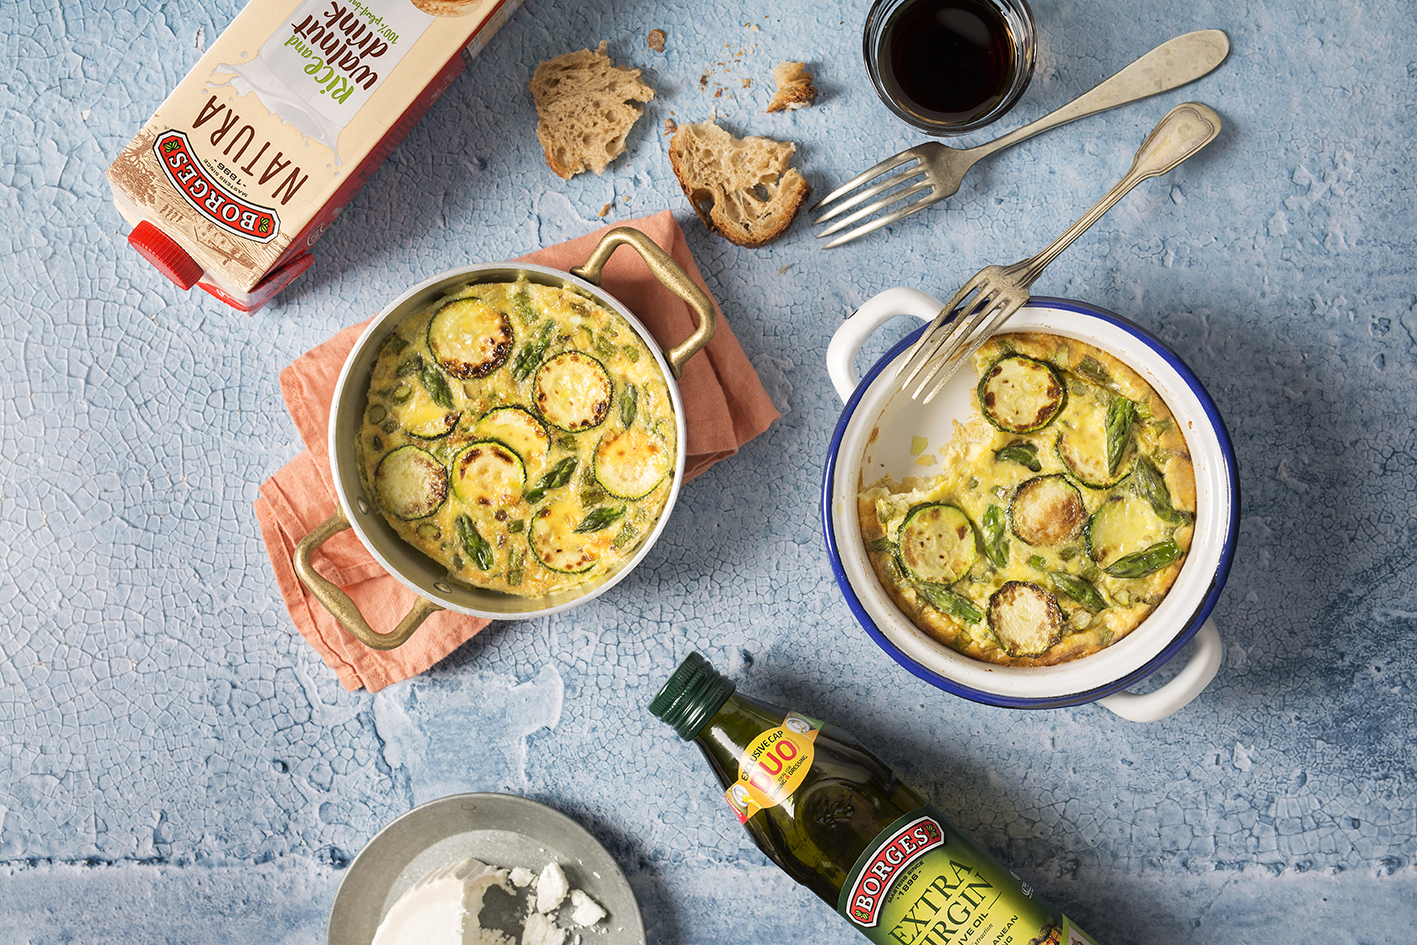 Asparagus and zucchini frittata served in two casseroles with a bottle of olive oil and nut drink